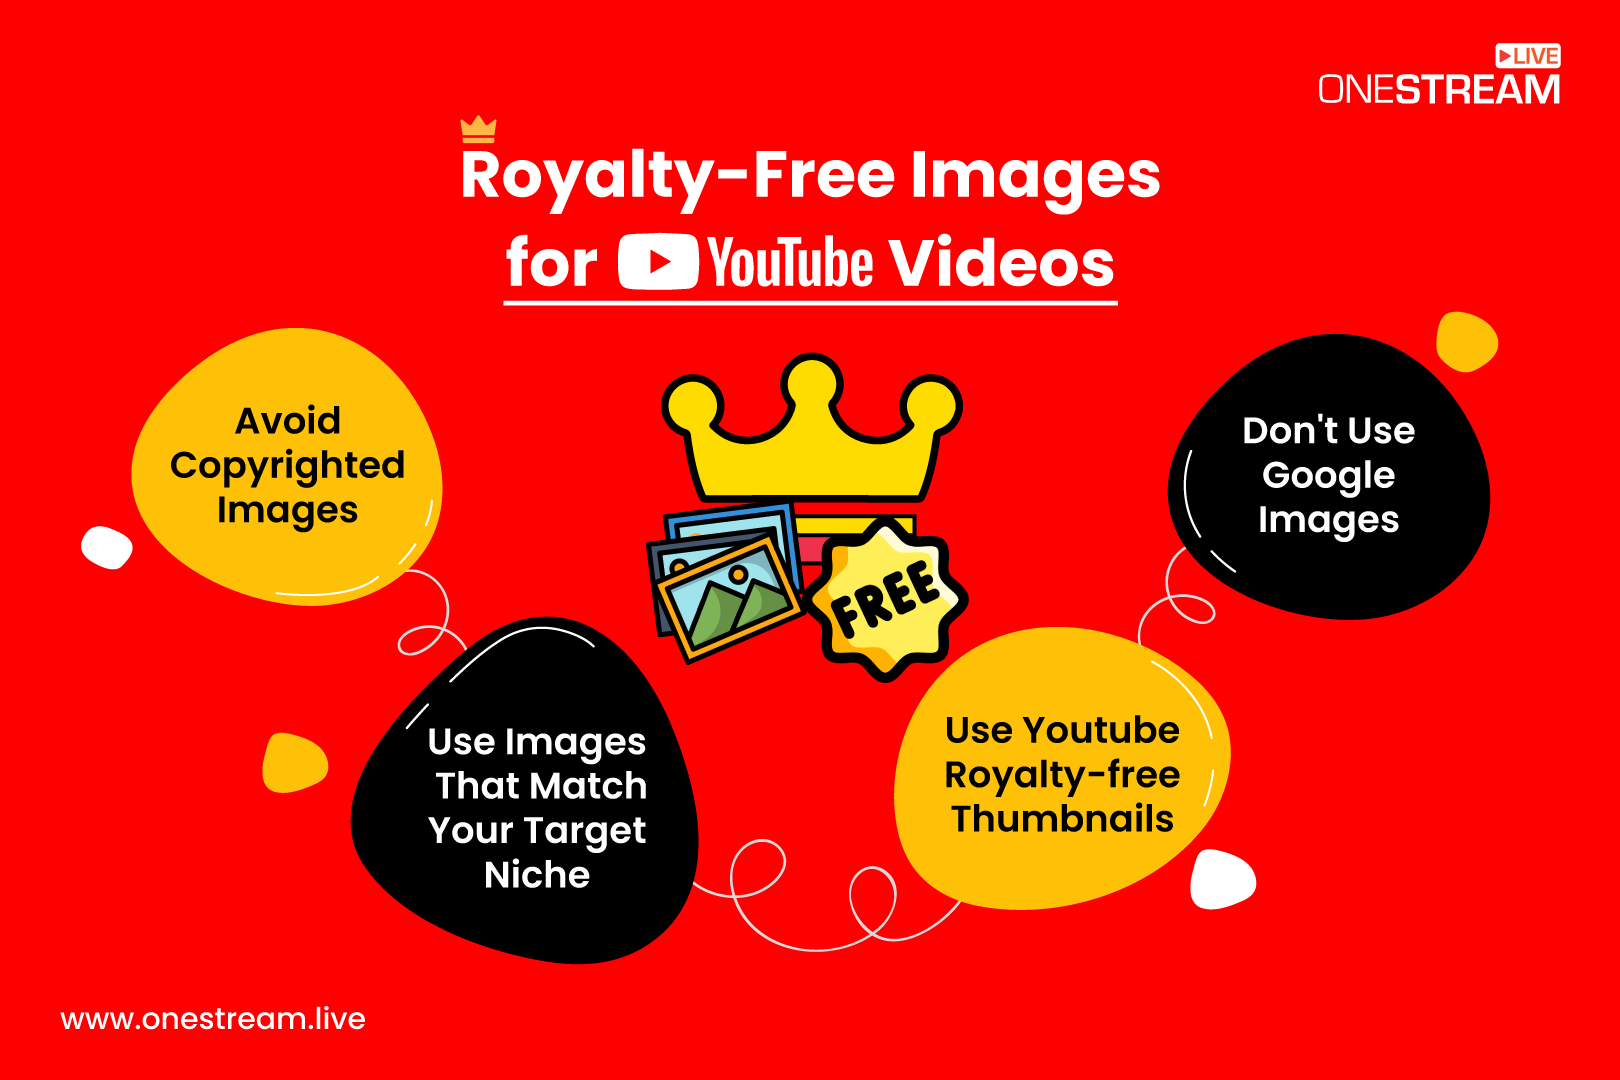 Royalty-free images for YouTube videos